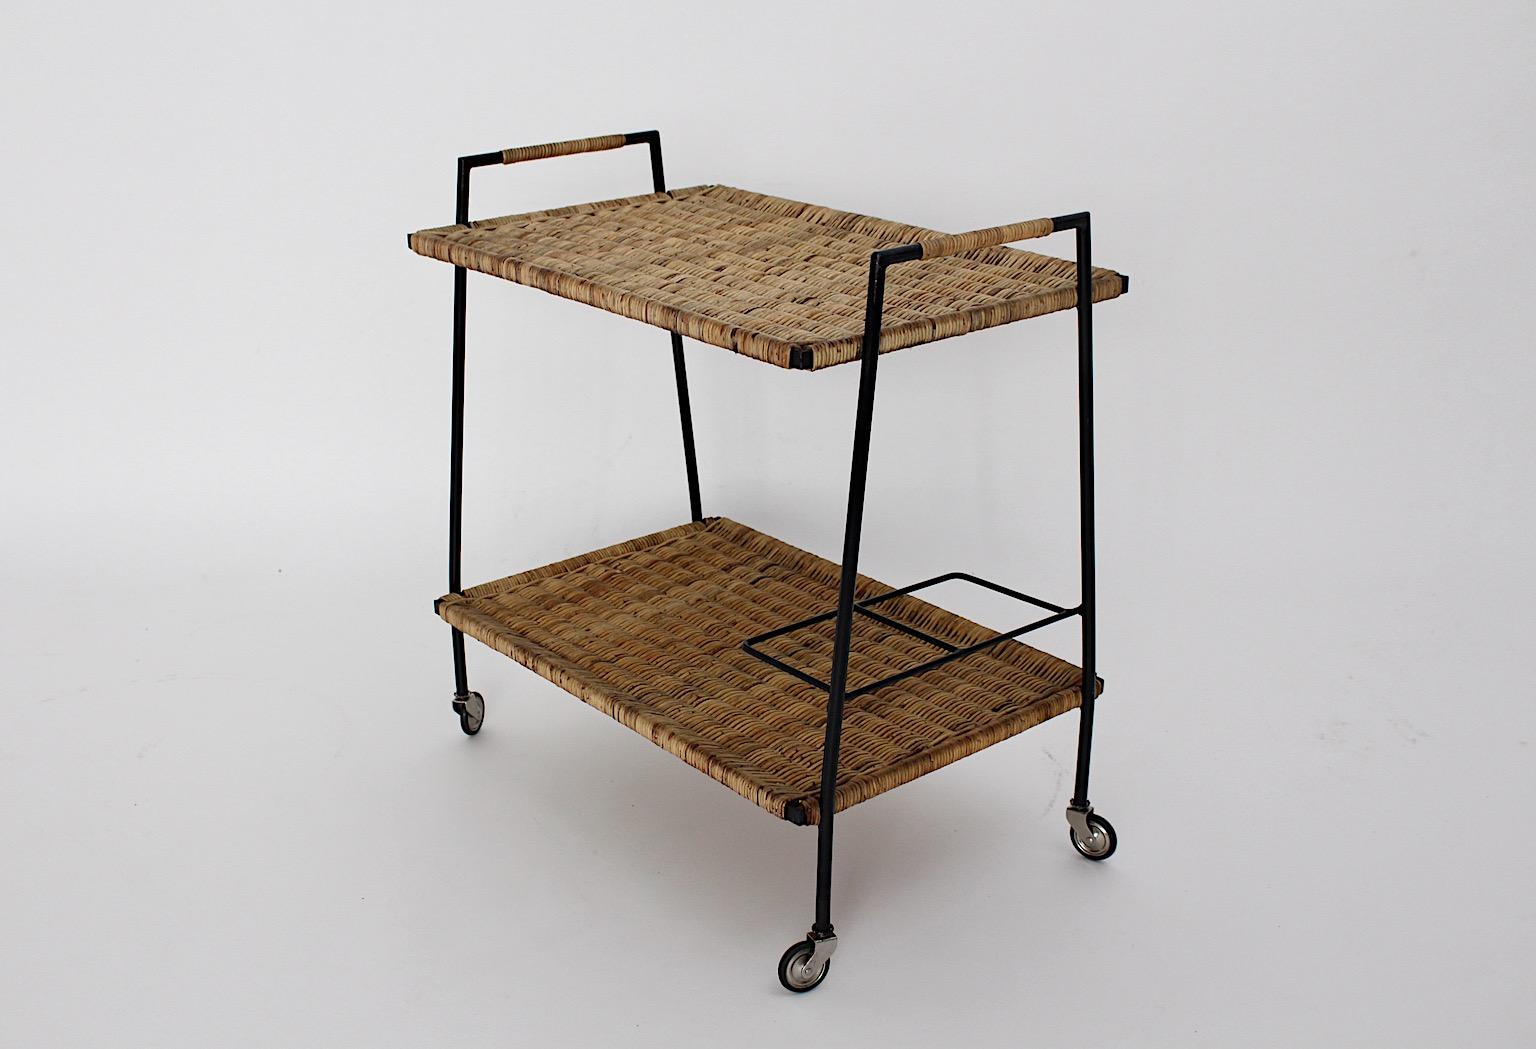 Mid-Century Modern Riviera style vintage bar cart or serving table from rattan and black lacquered metal with two trays and four wheels designed 1950s Austria.
Amazing bar cart with woven rattan network trays and partly wrapped handles in good and